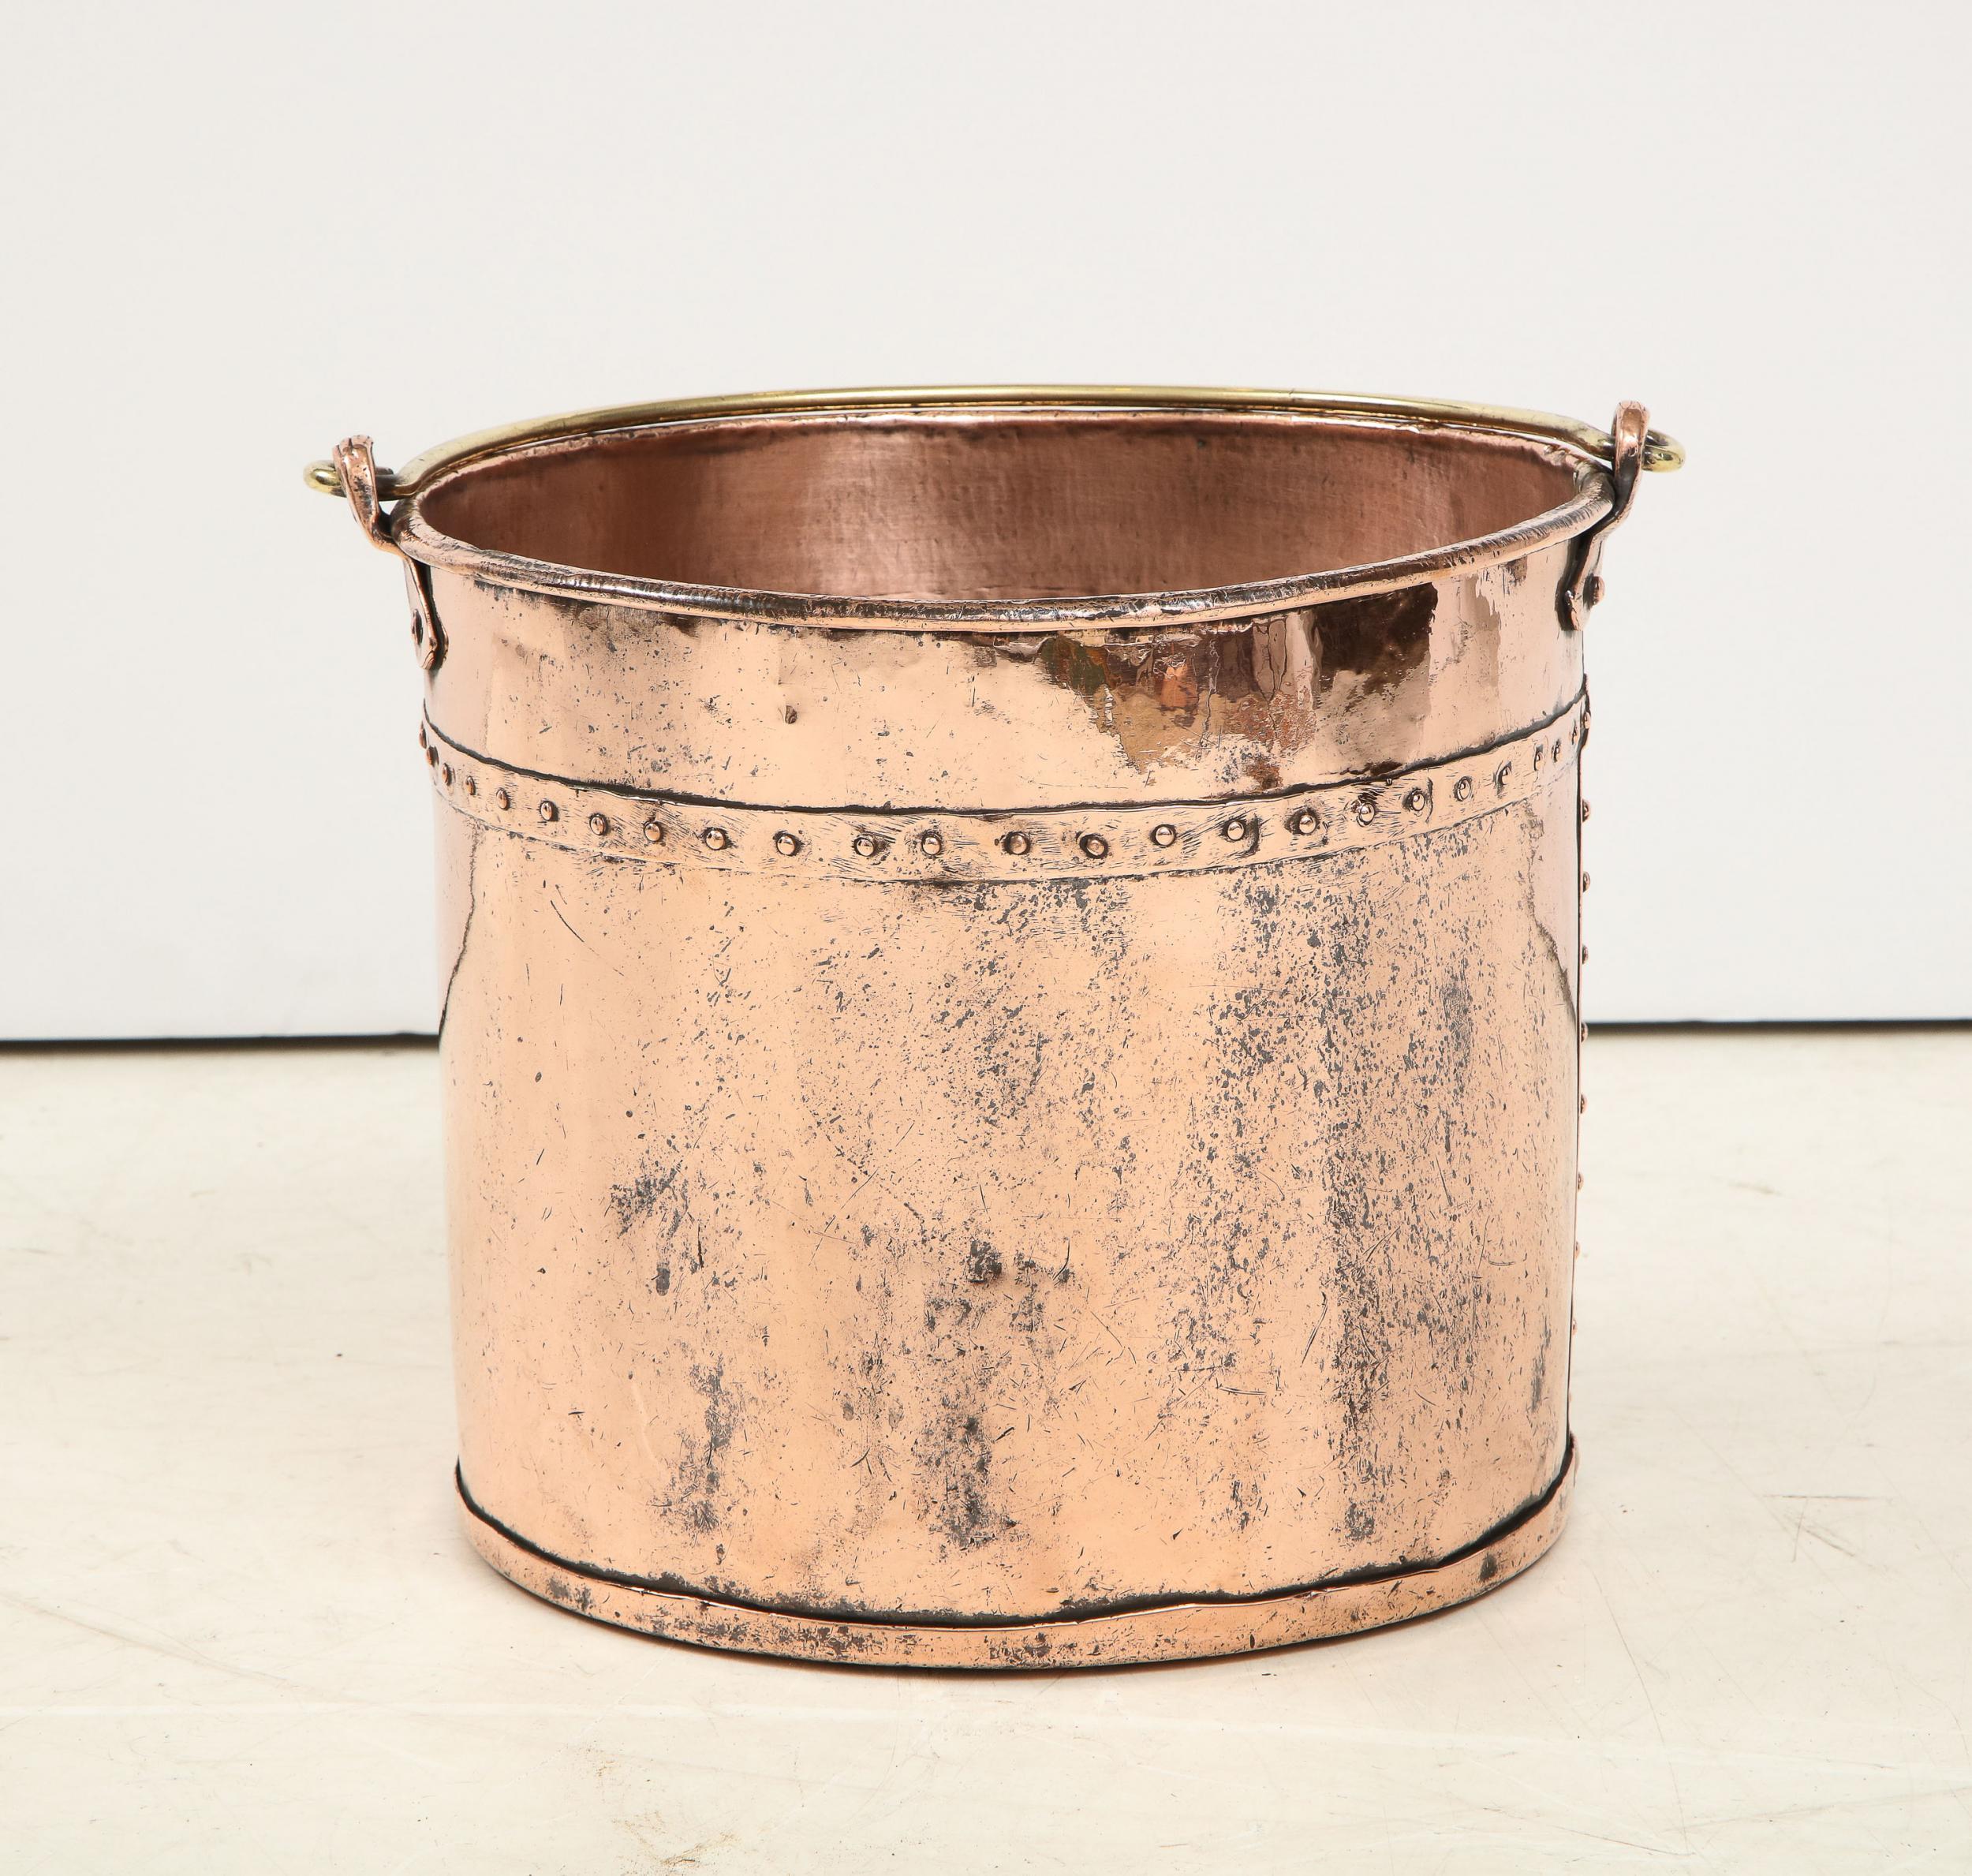 Good English 19th century hammered copper apple kettle, having brass bail handle, hand riveted seams and rich rose glow. Ideal for kindling bucket.